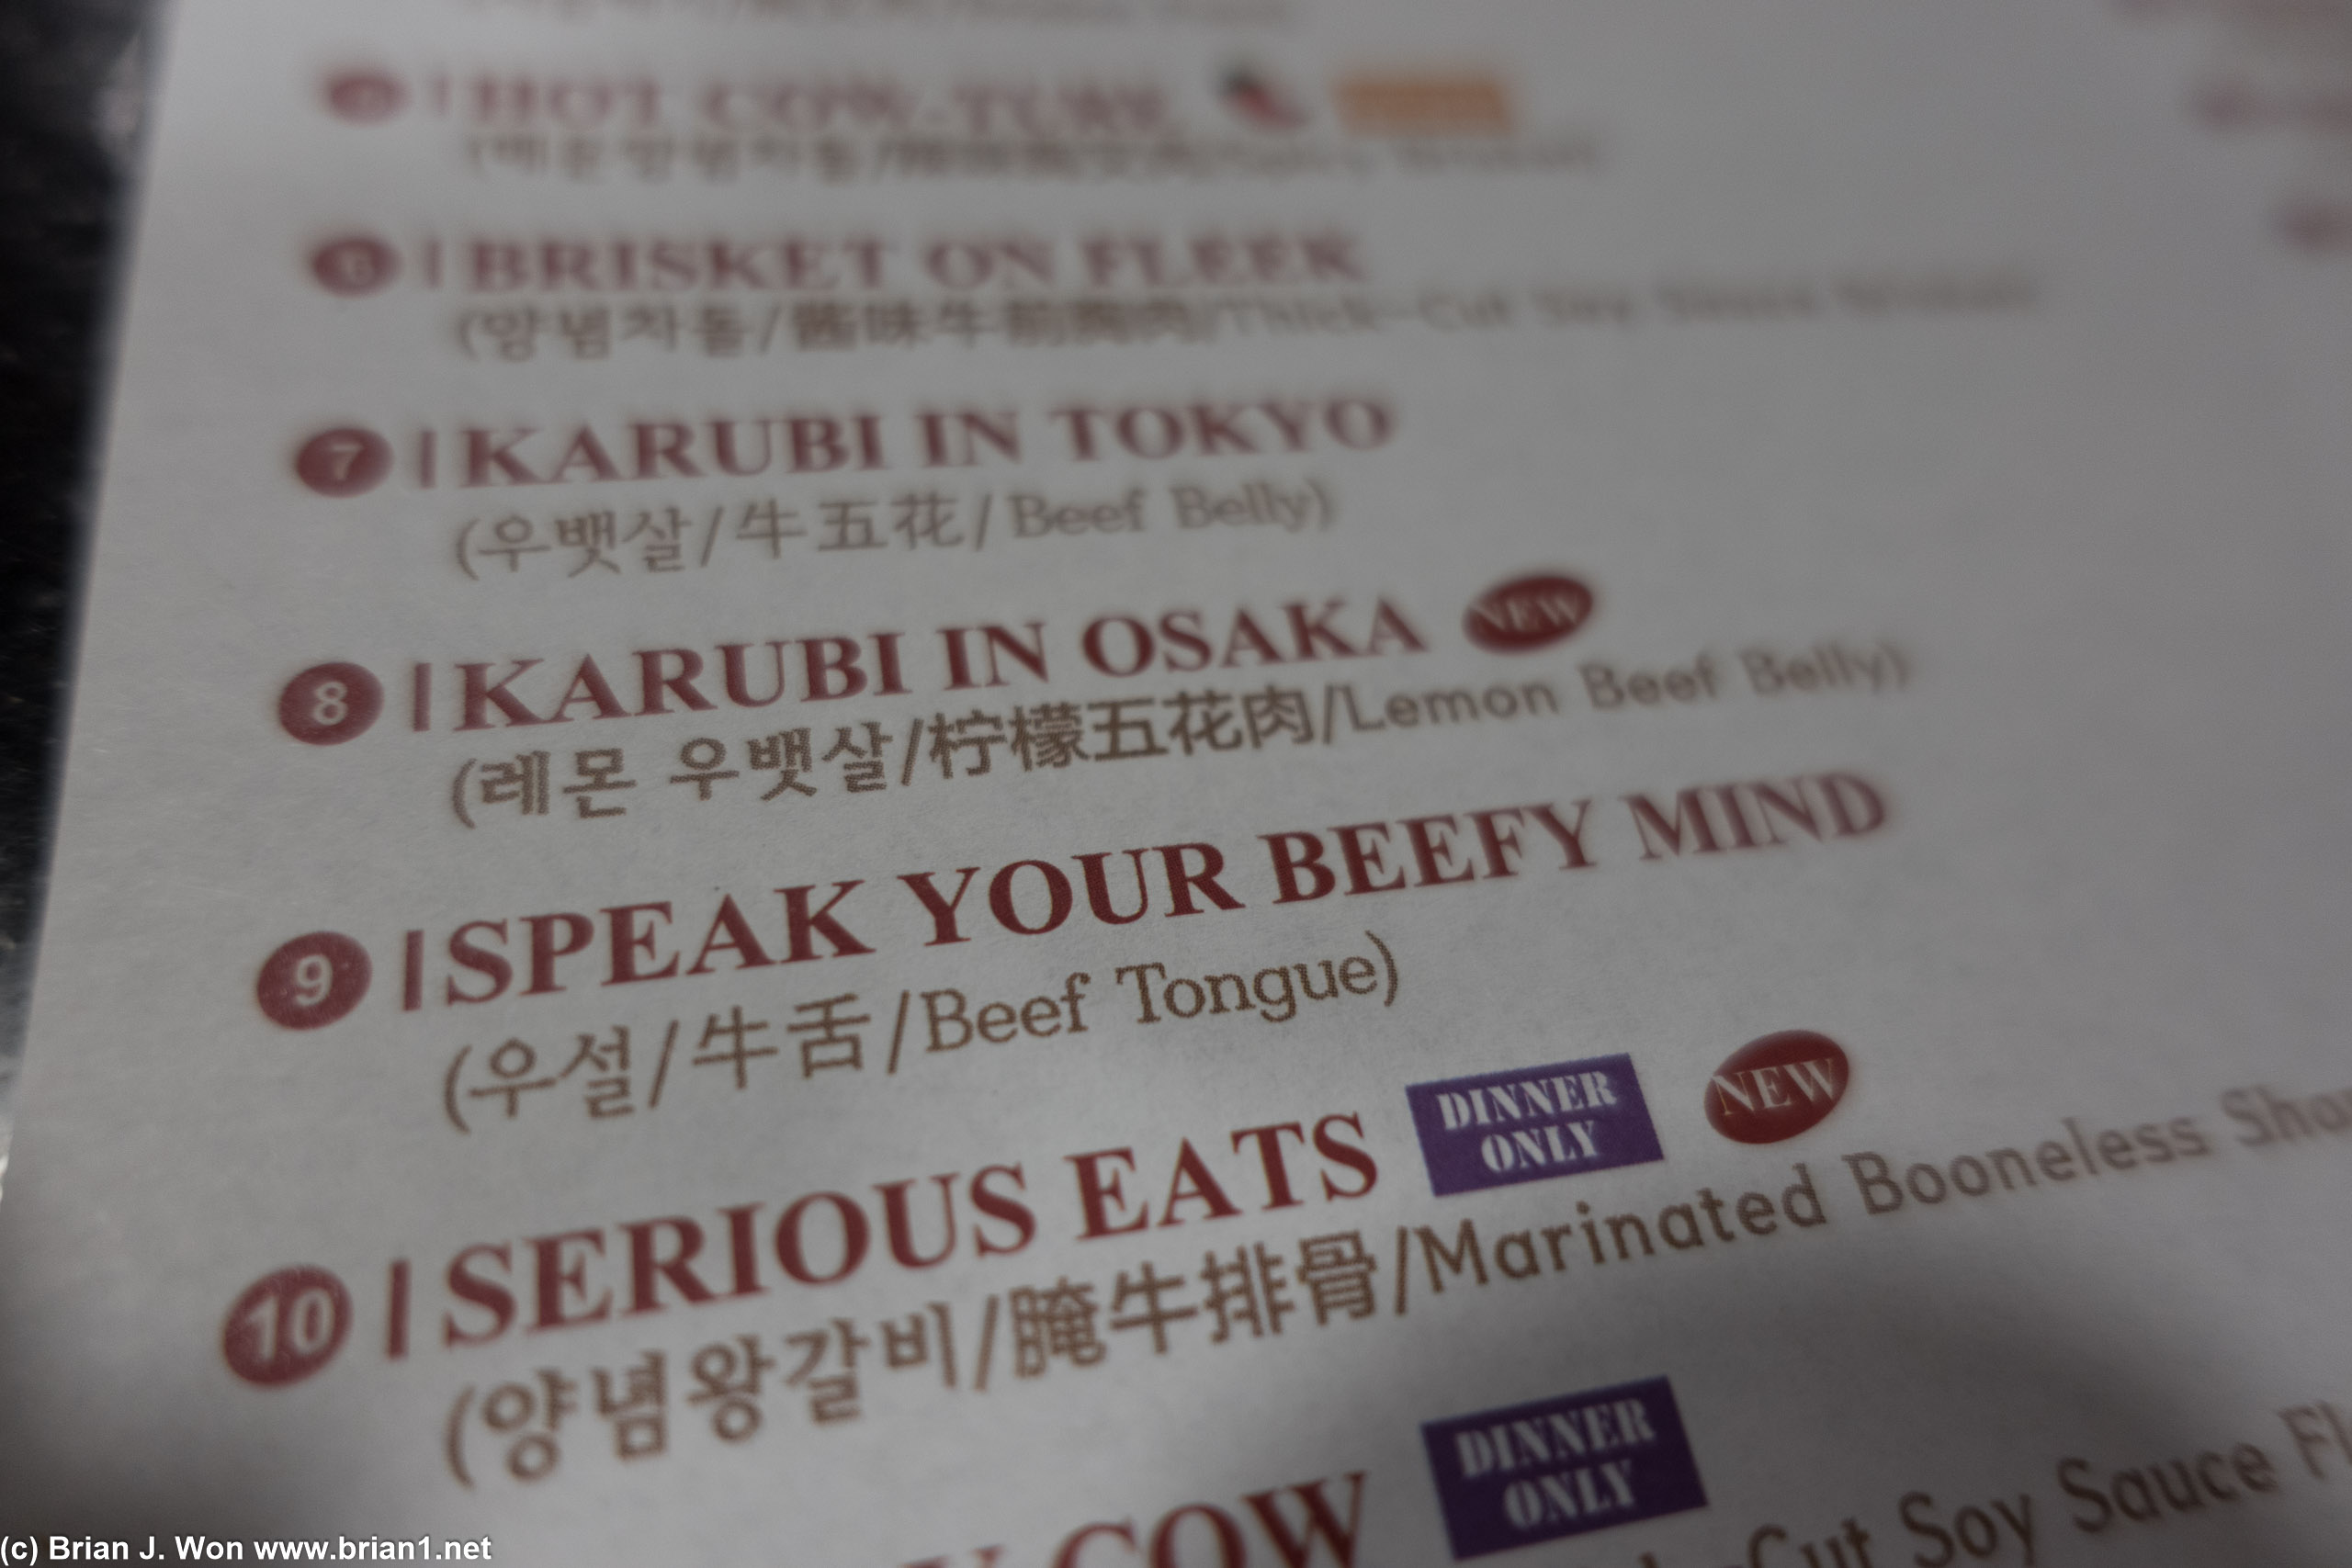 Beef tongue name: Speak Your Beefy Mind.